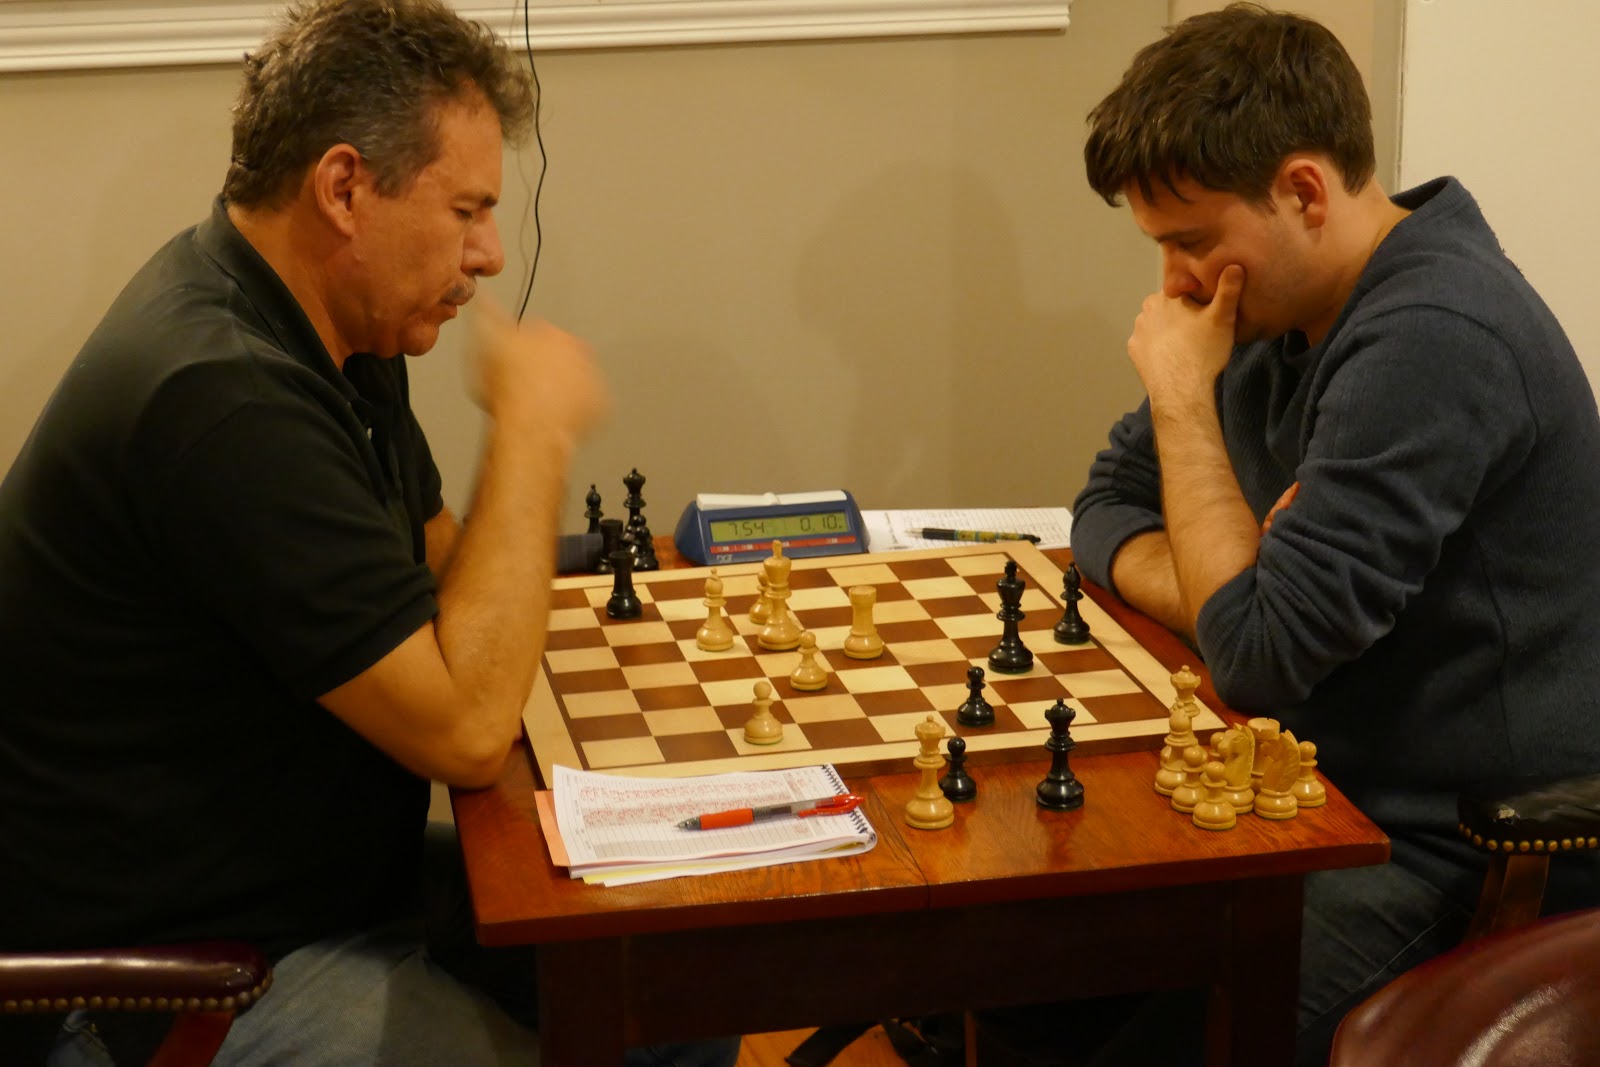 Chess player albertoc67 (Alberto from Lecco, Italy) - GameKnot